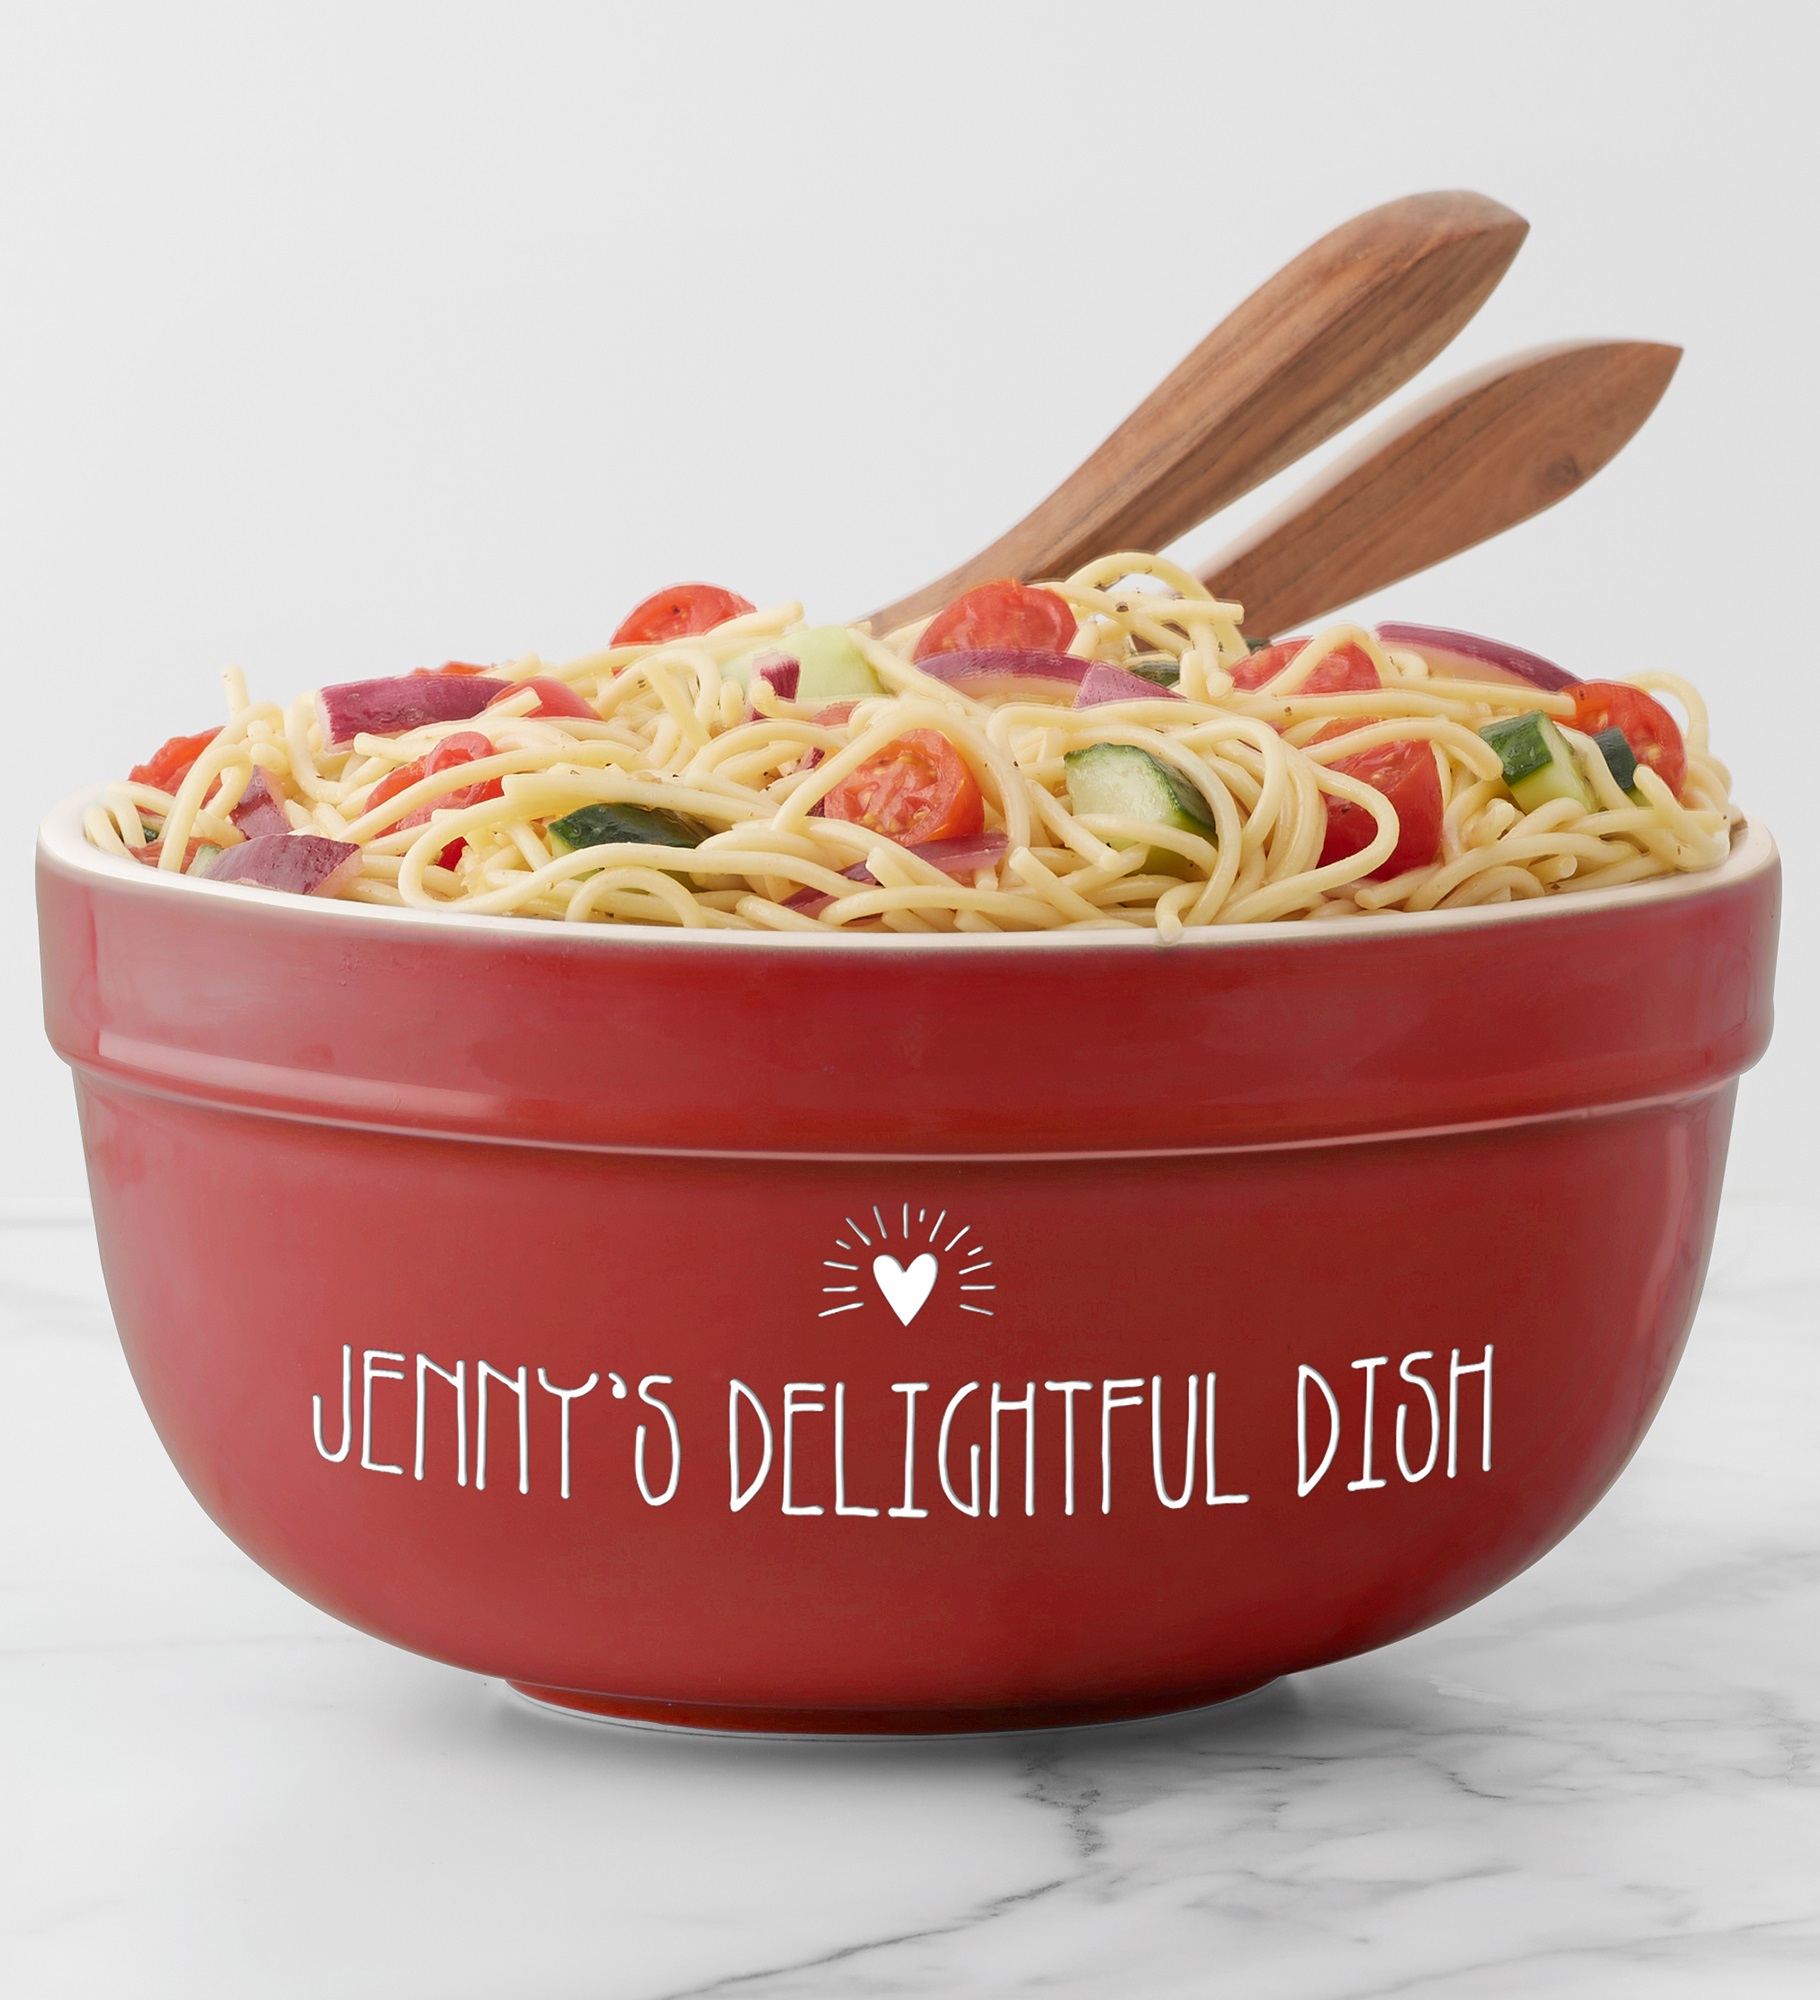 Made With Love Personalized Ceramic Serving Bowl